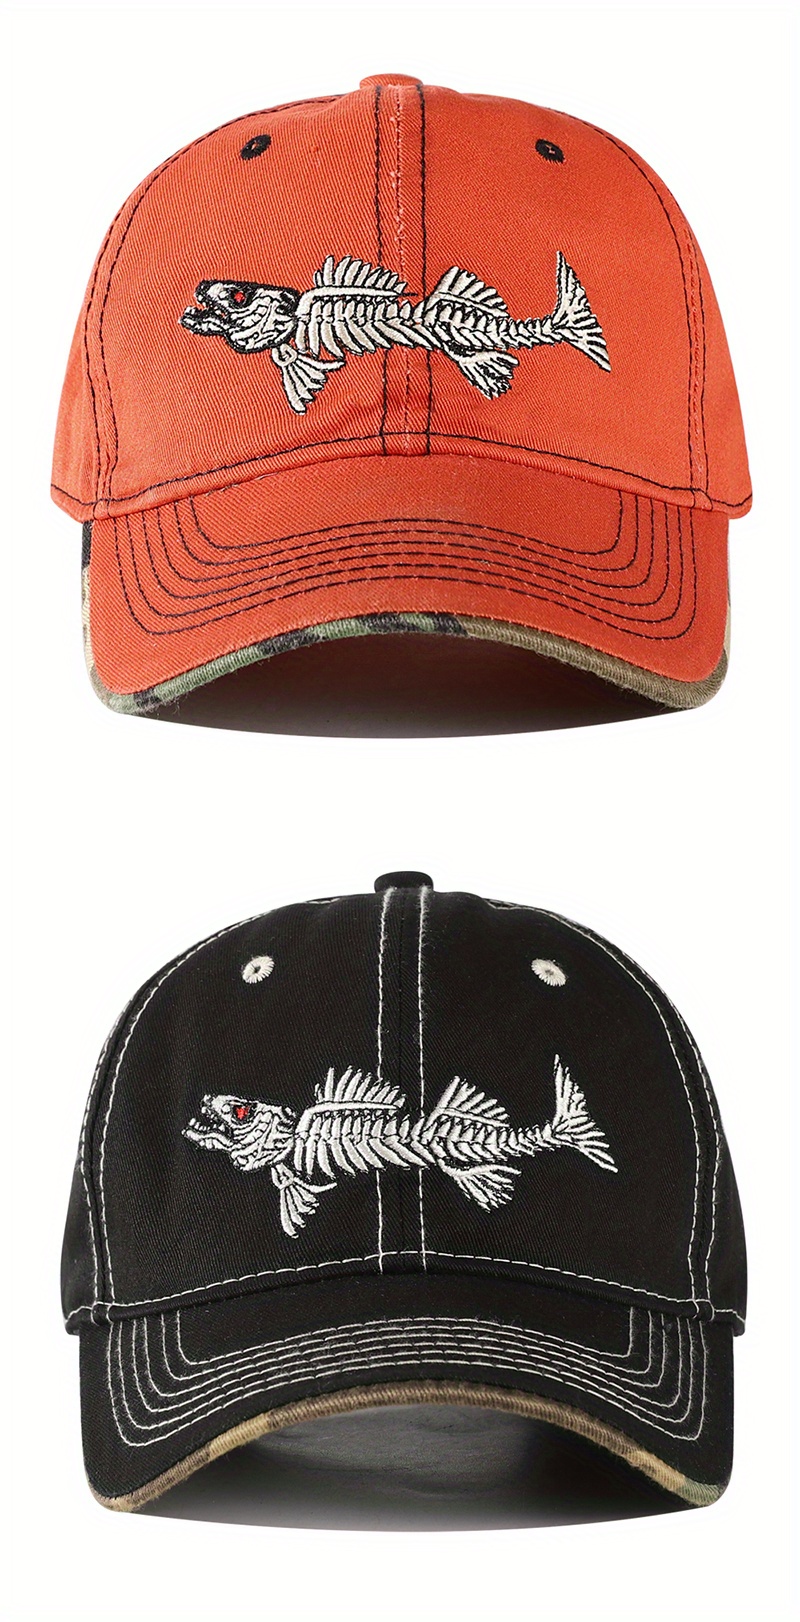 Fish Bone Embroidered Outdoor Baseball Cap For Men, Women, And